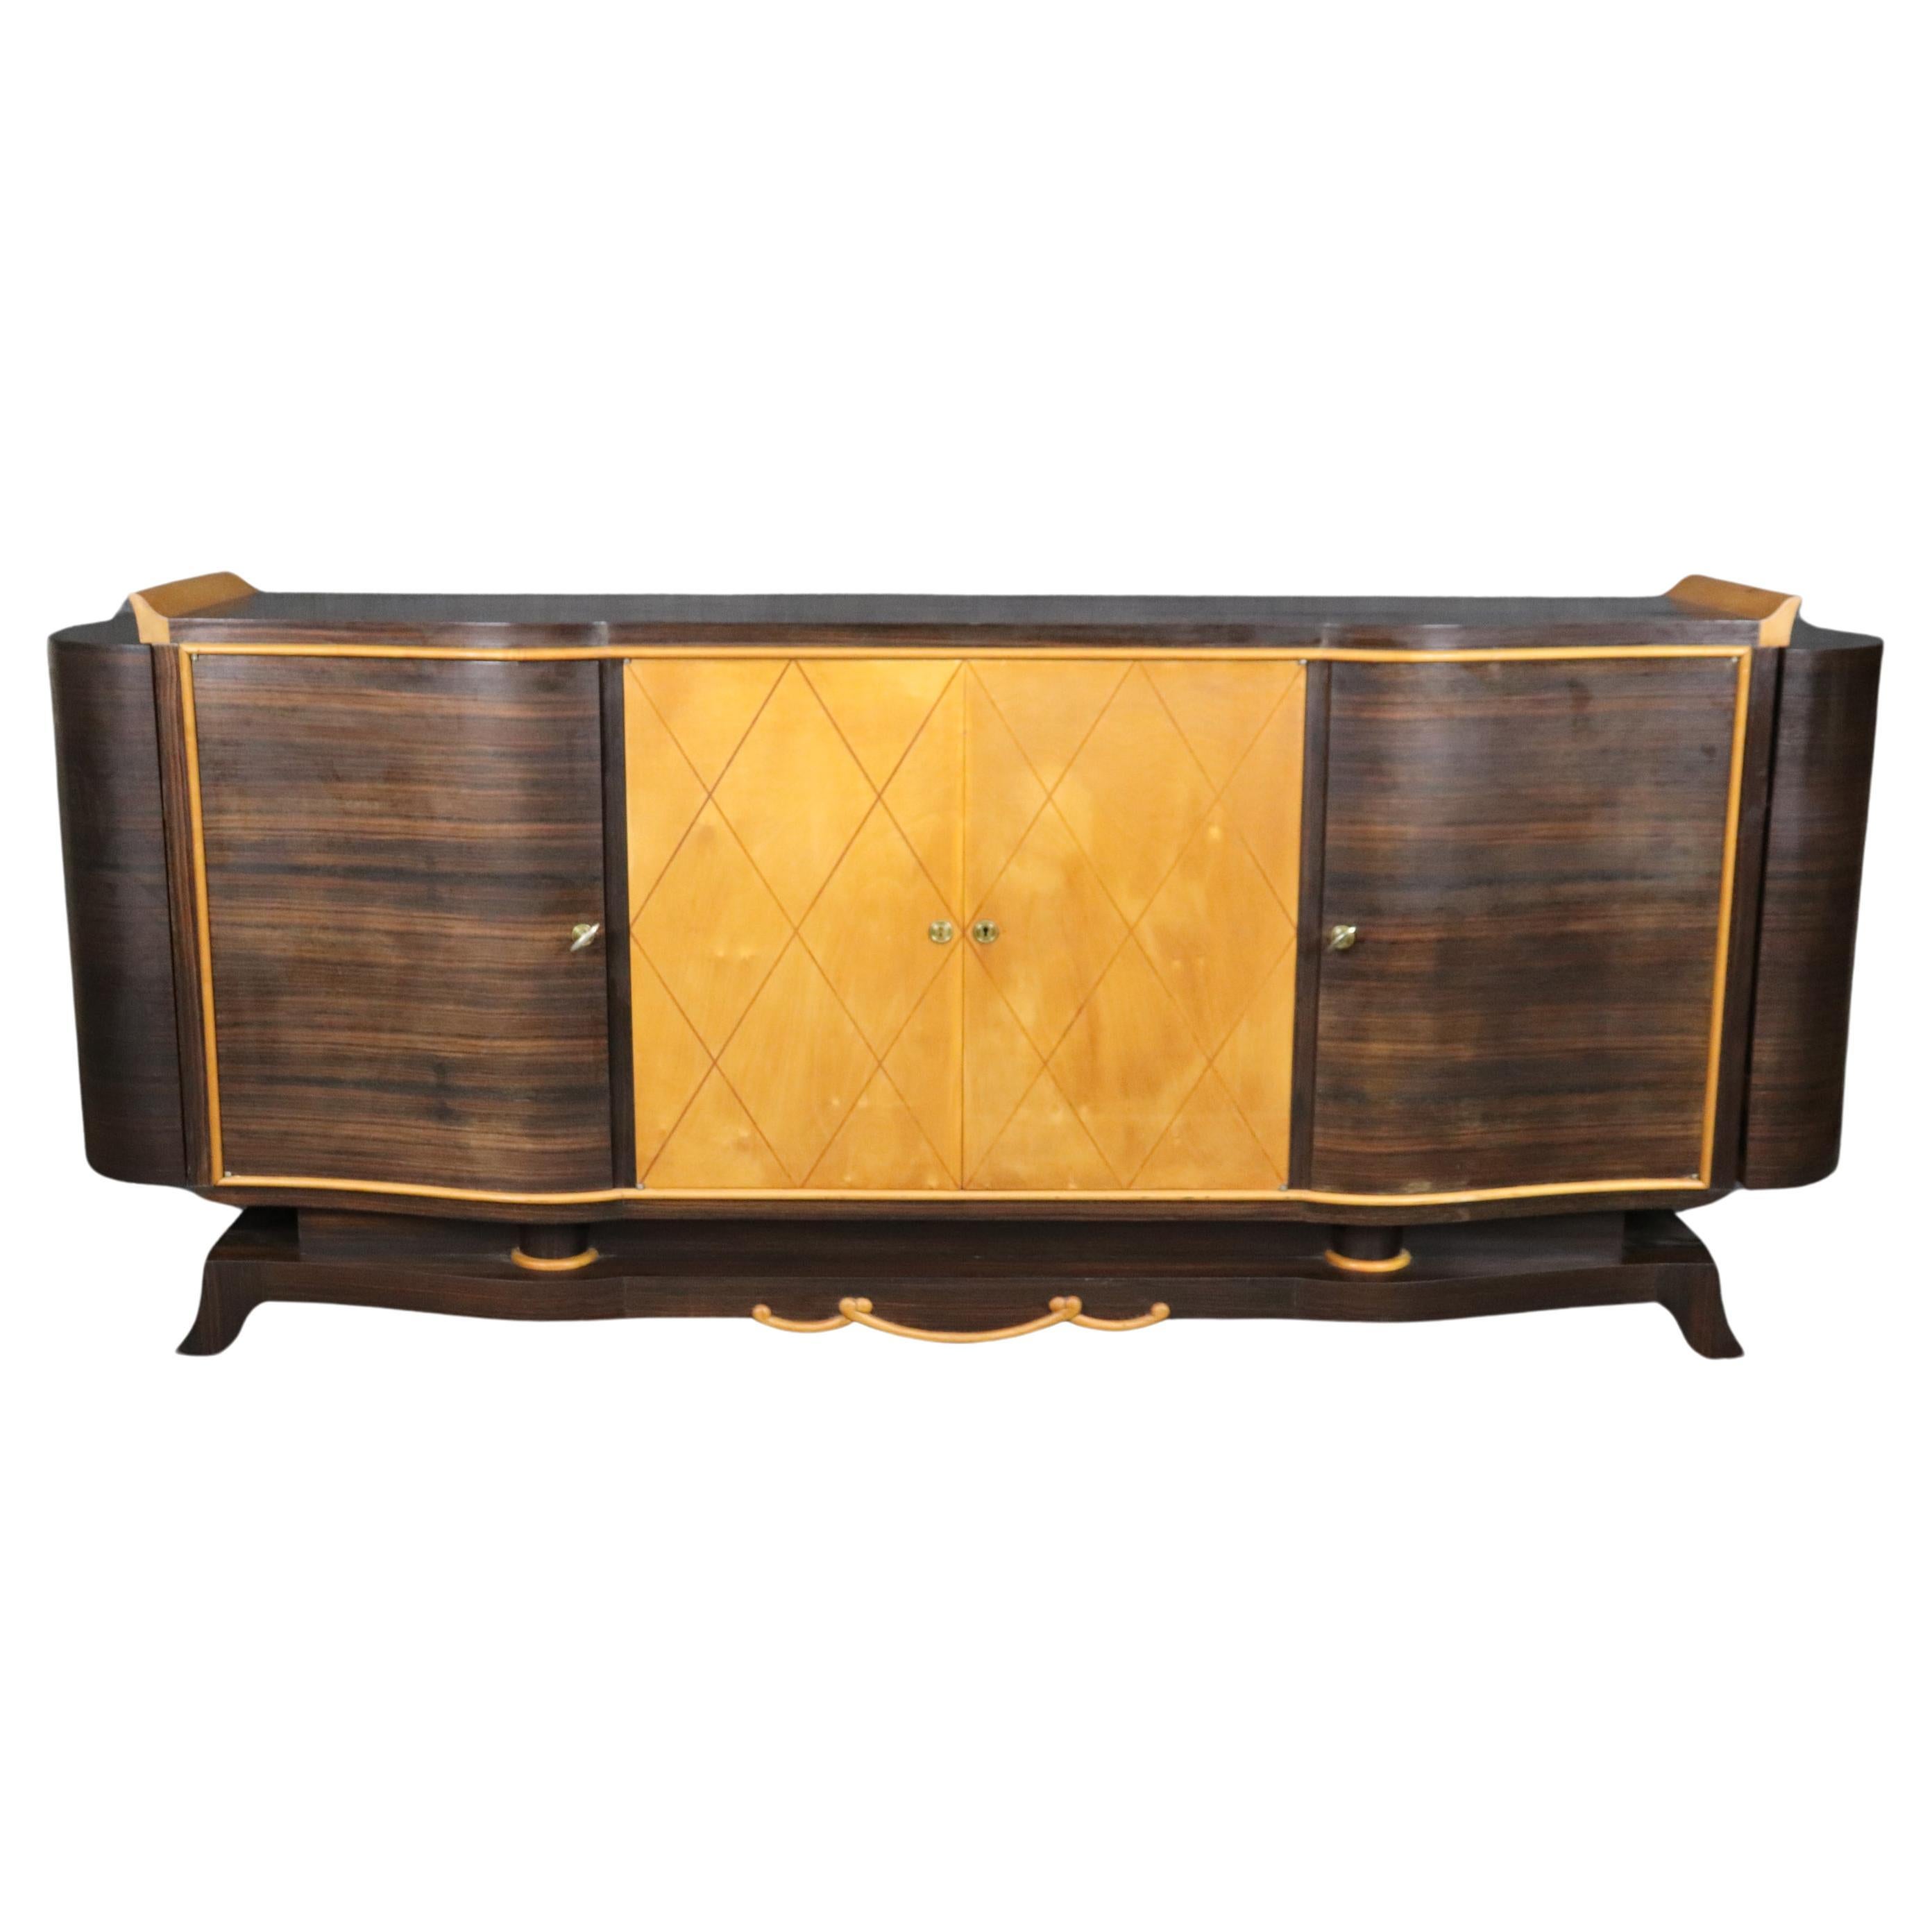 Rare Macassar Ebony and Satinwood French Art Deco Sideboard in The manner Leleu For Sale